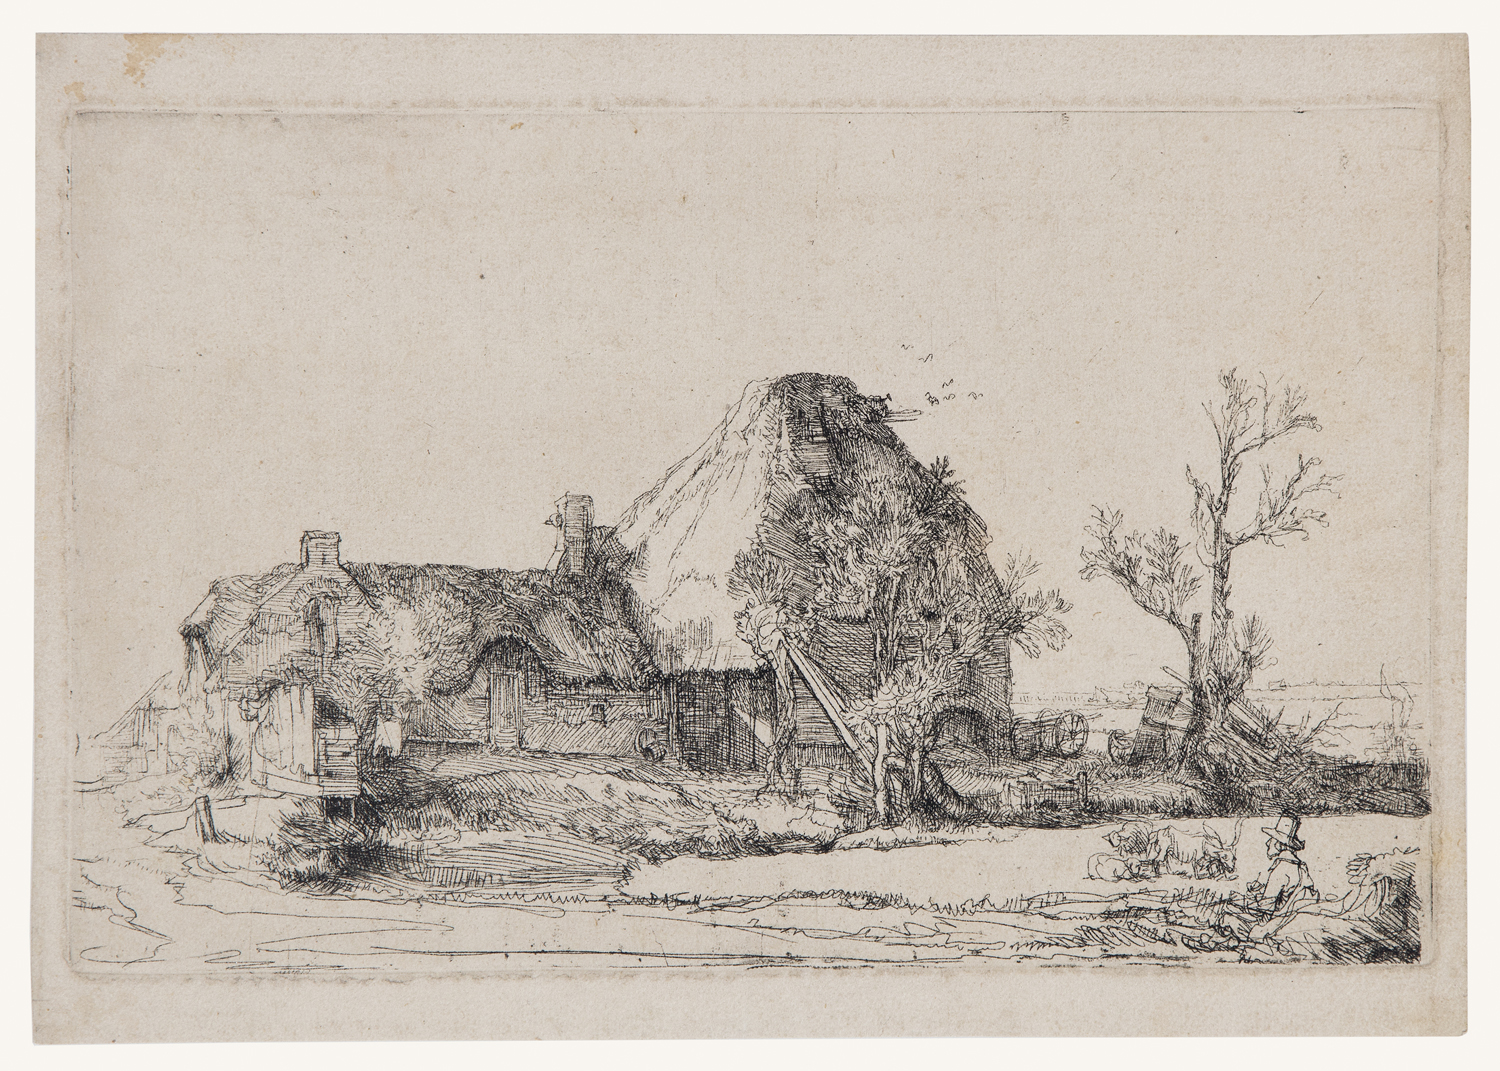 Cottage and farm buildings with a man sketching